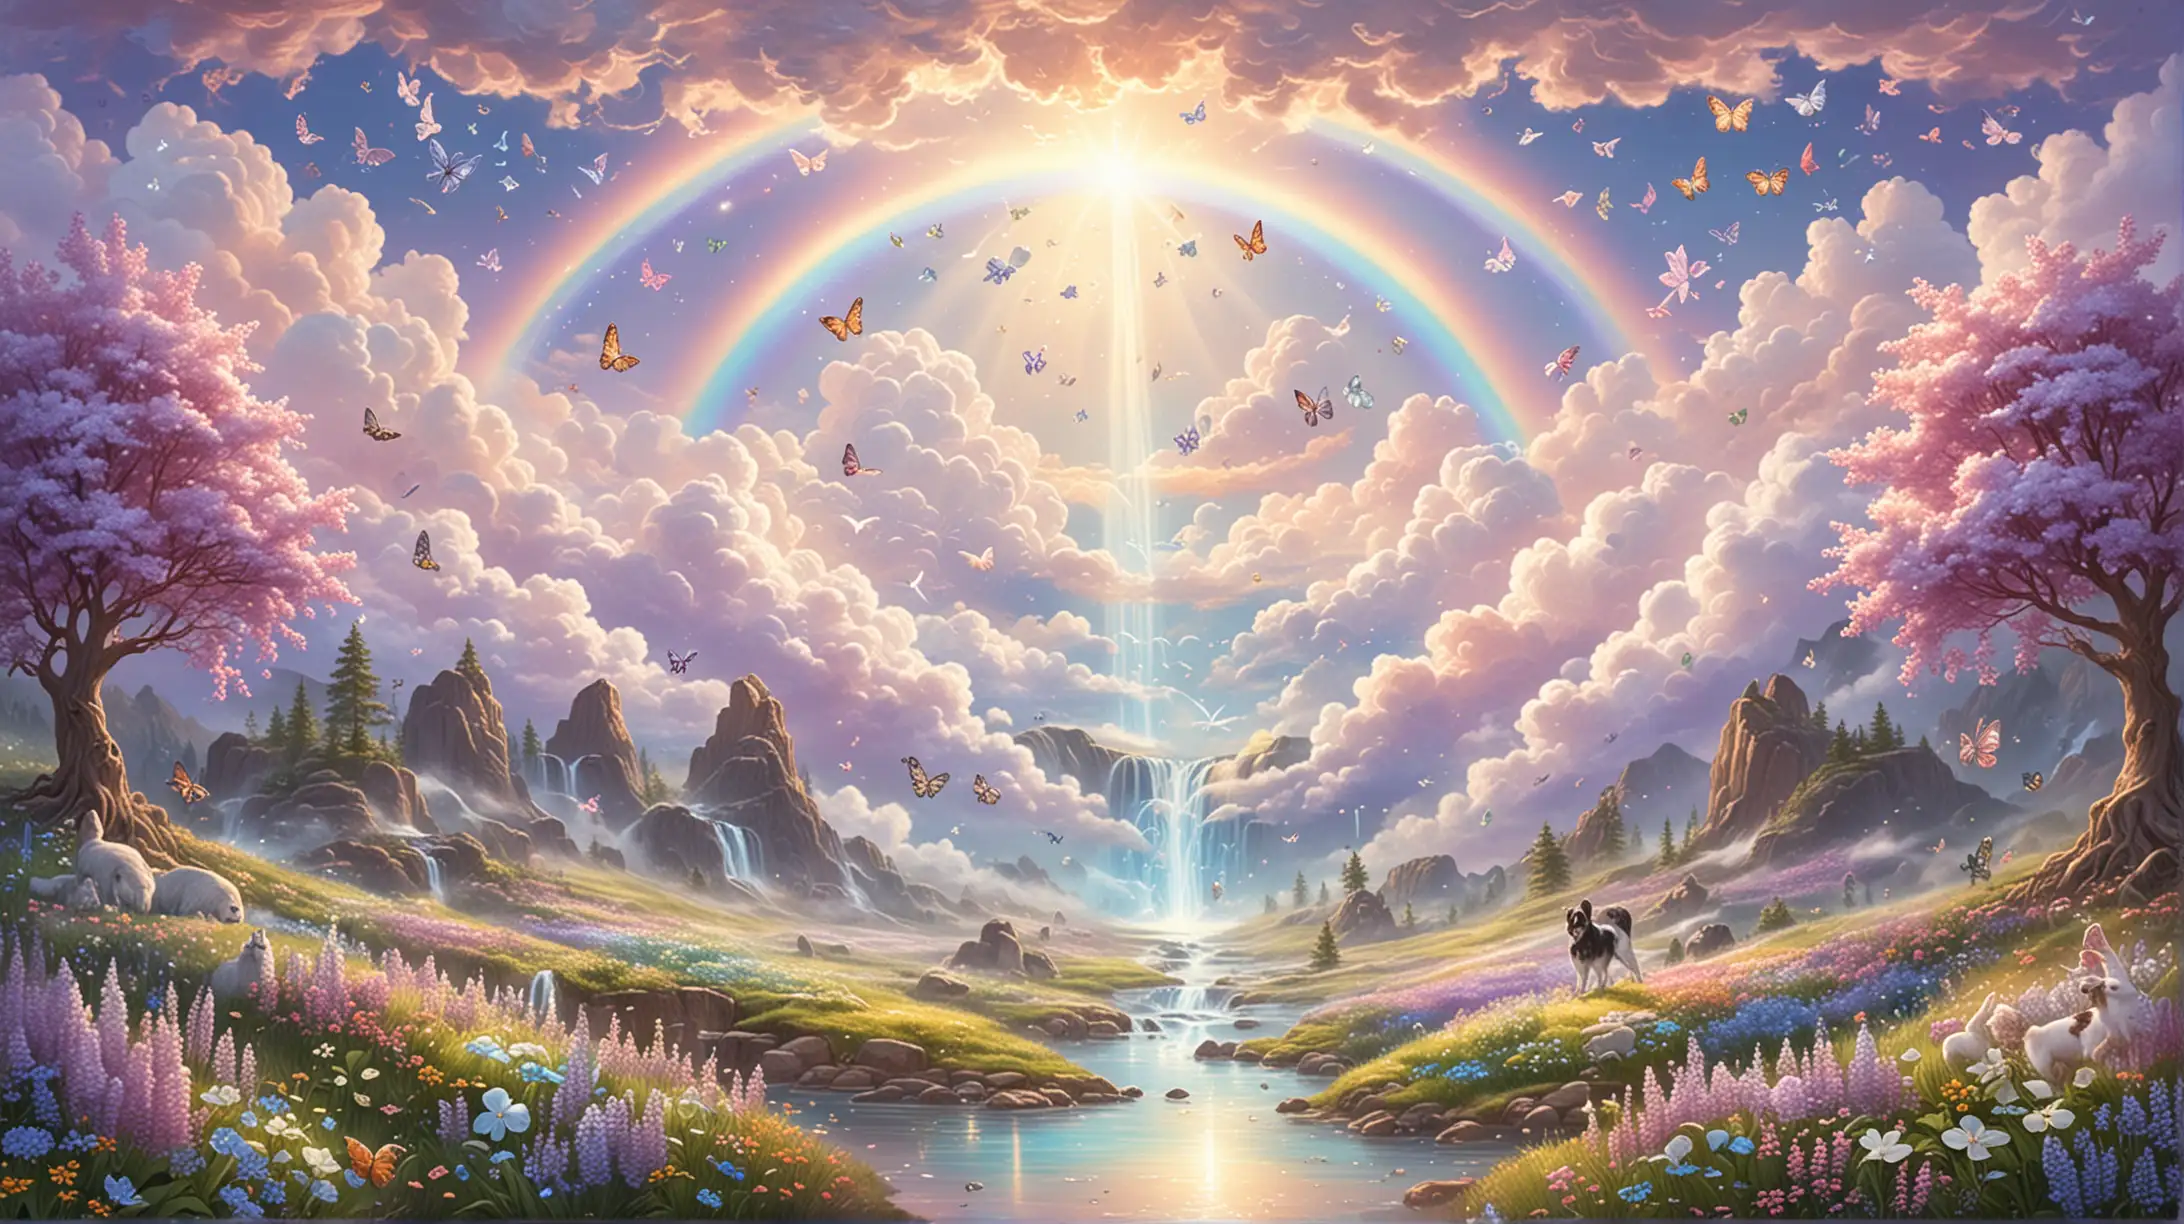 into a pastel rainbow sparkly magical cloud heaven, with an opal moonstone crystal pathway,  lilacs and four-leaf-clovers, with a waterfall, butterflies, fairies, bunnies, puppies, and magical creatures flying, shooting stars, bright white light shining in from heaven, symmetrial